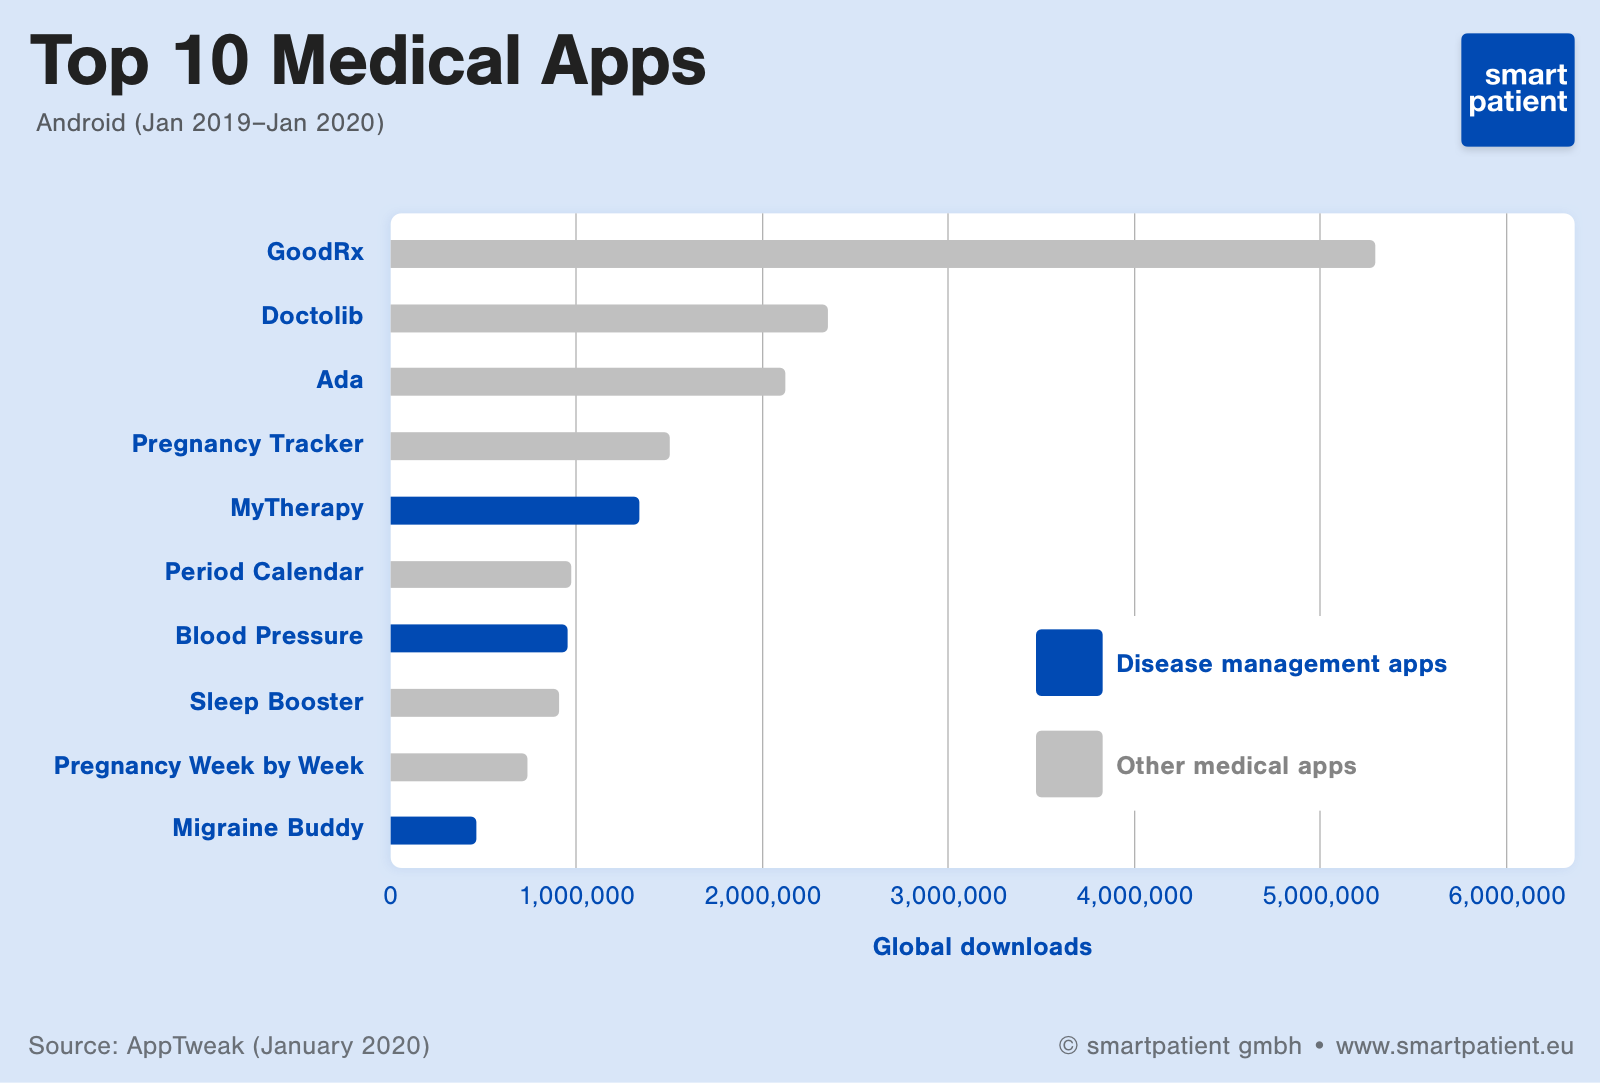 Bar graph of most downloaded medical apps on Android in last year